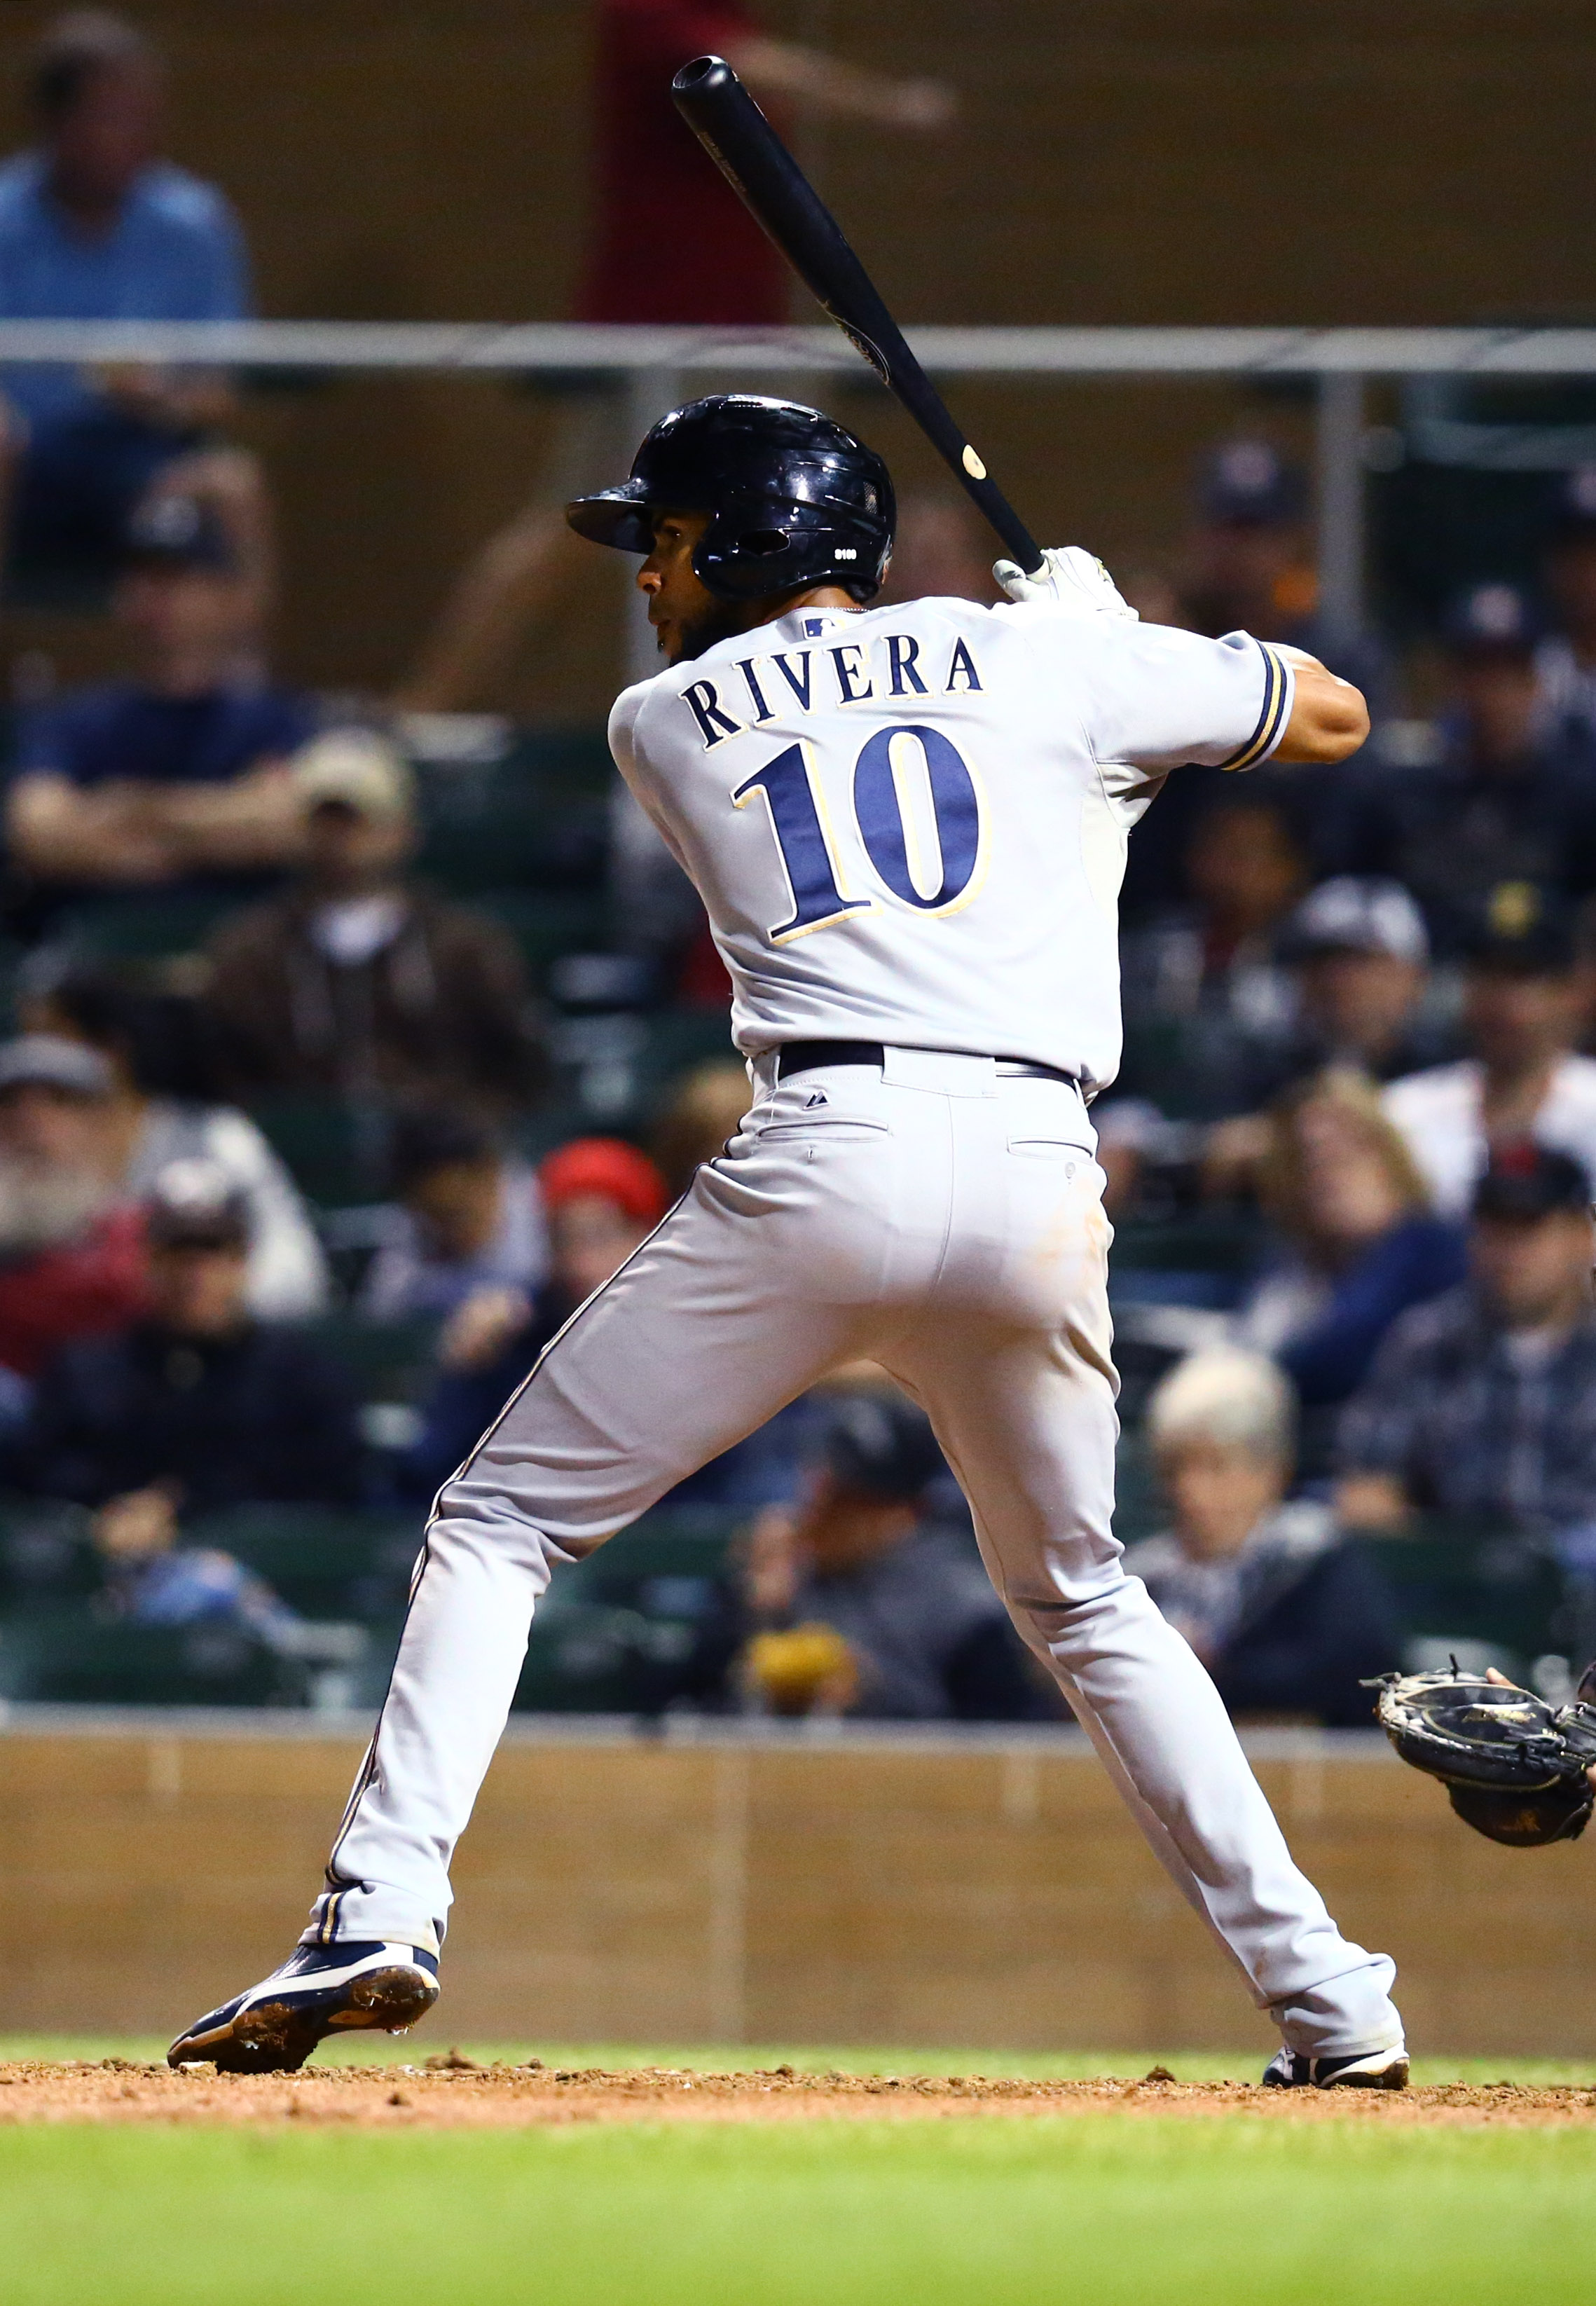 Yadiel Rivera had a great Arizona Fall League but is not a correct answer on this quiz.